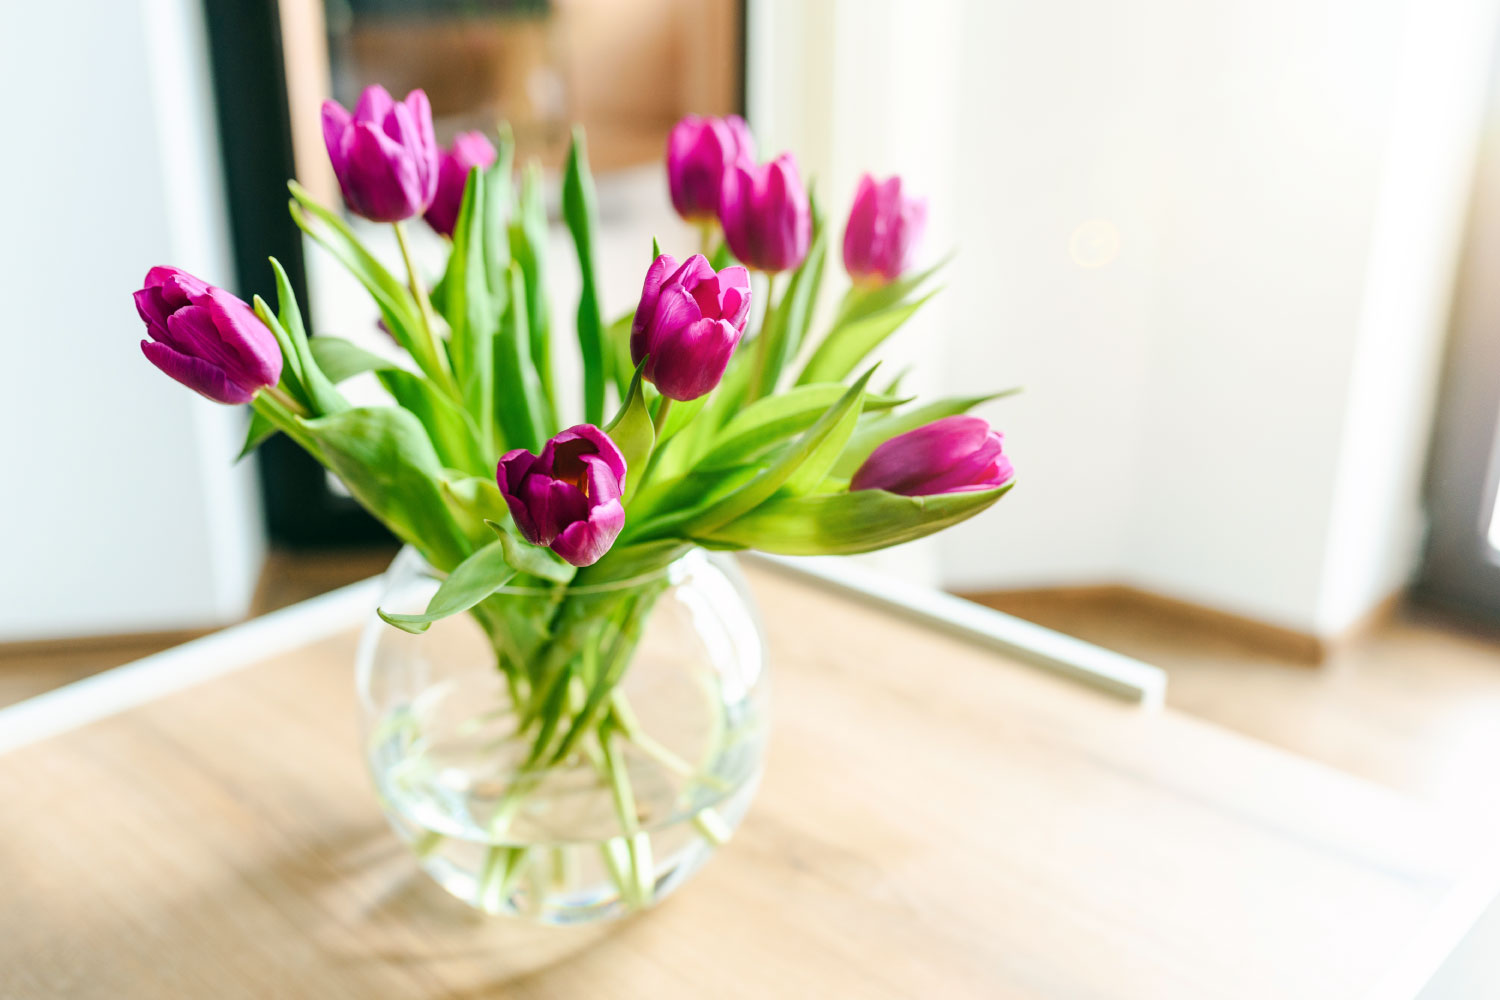 The 10 Best Flowers To Send For Condolences – Bloombar Flowers